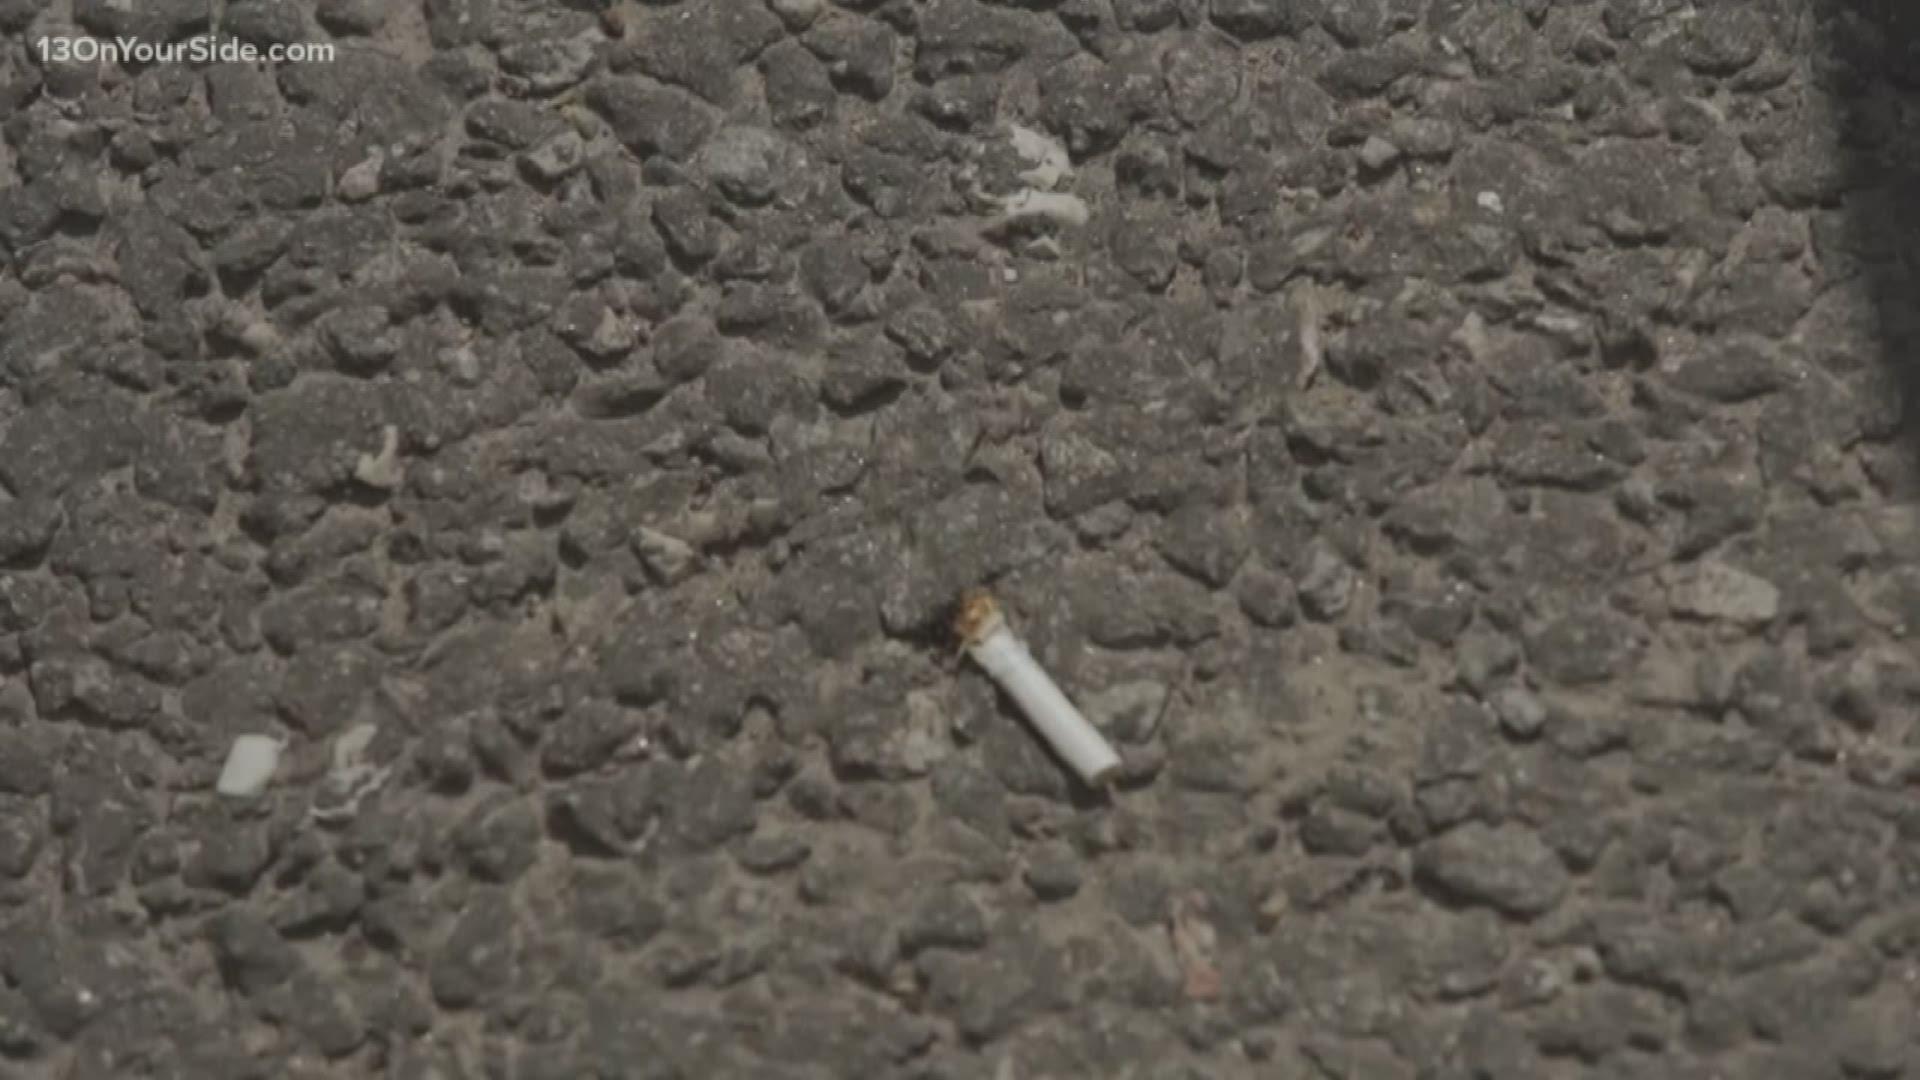 Muskegon considers smoking ban in some public spaces.